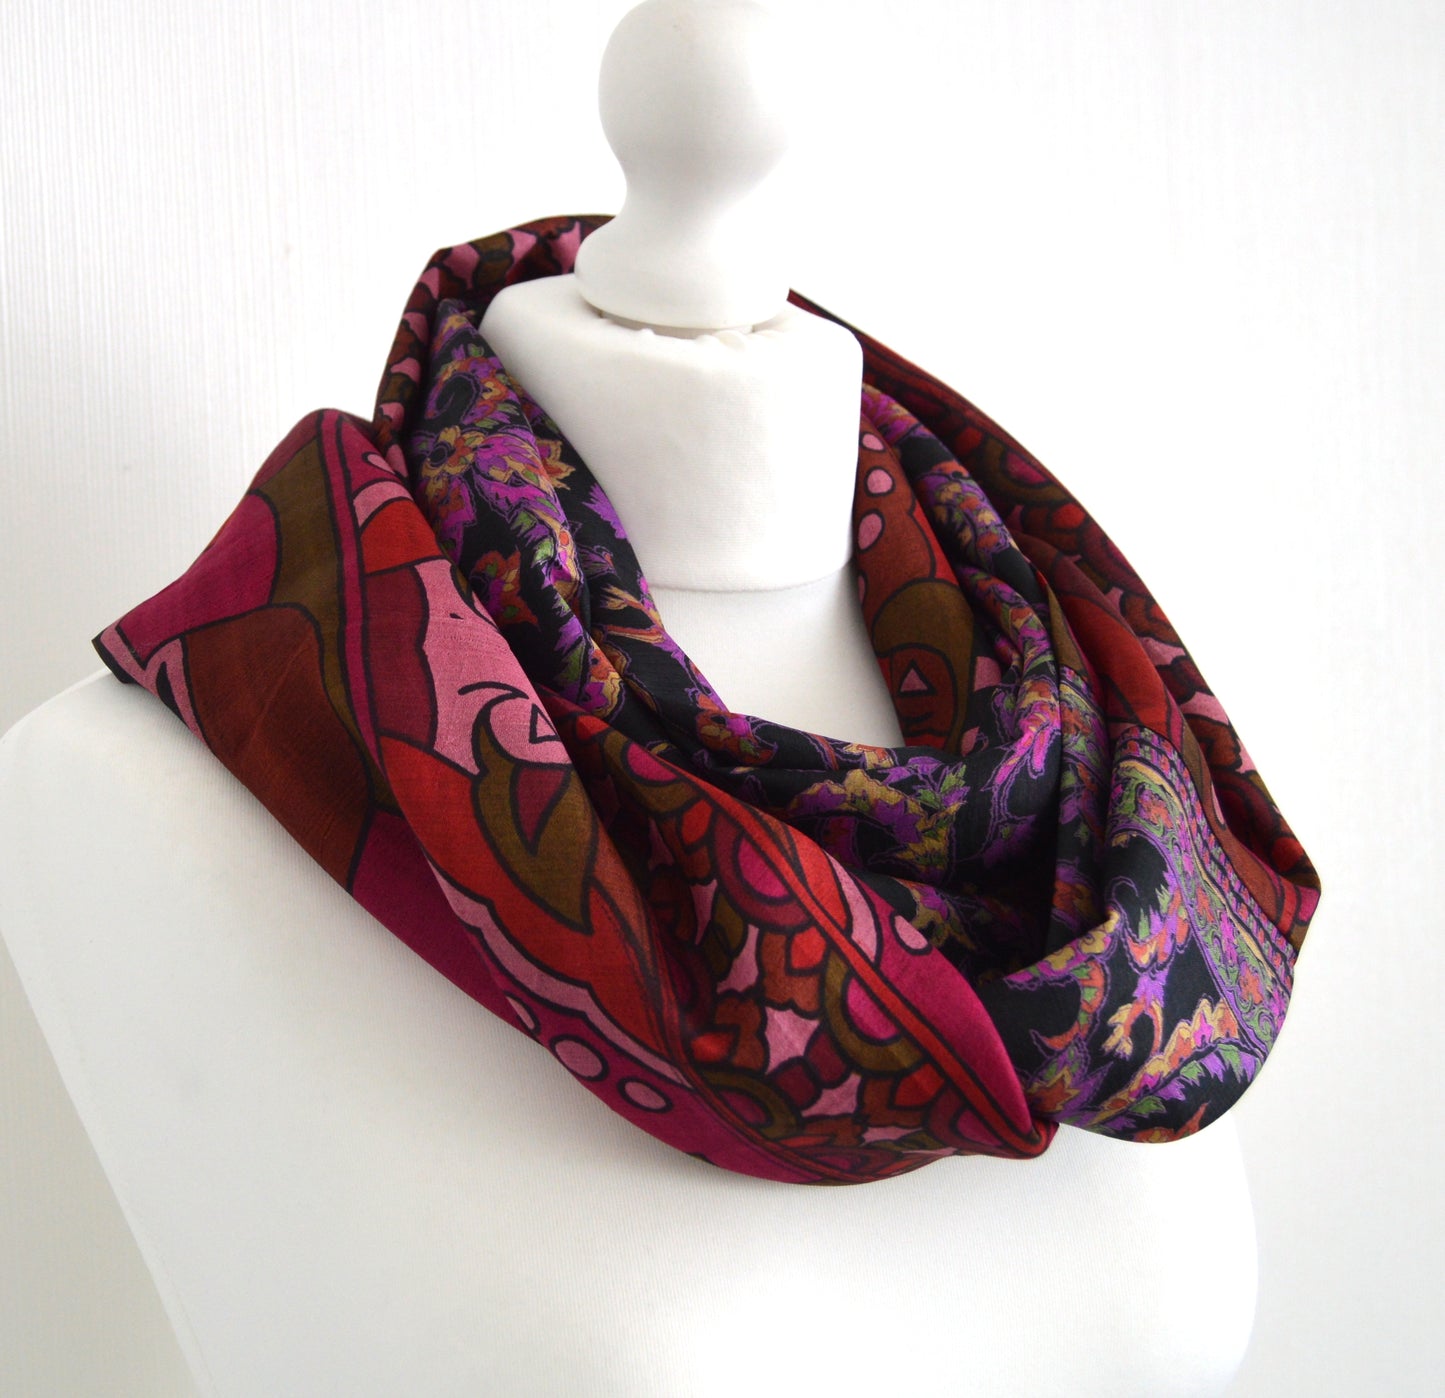 Black Magenta Upcycled Vintage Sari Silk Infinity Loop Scarf - Eco Friendly Zero Waste Womens Scarf - Perfect Mothers Day Gift For Her